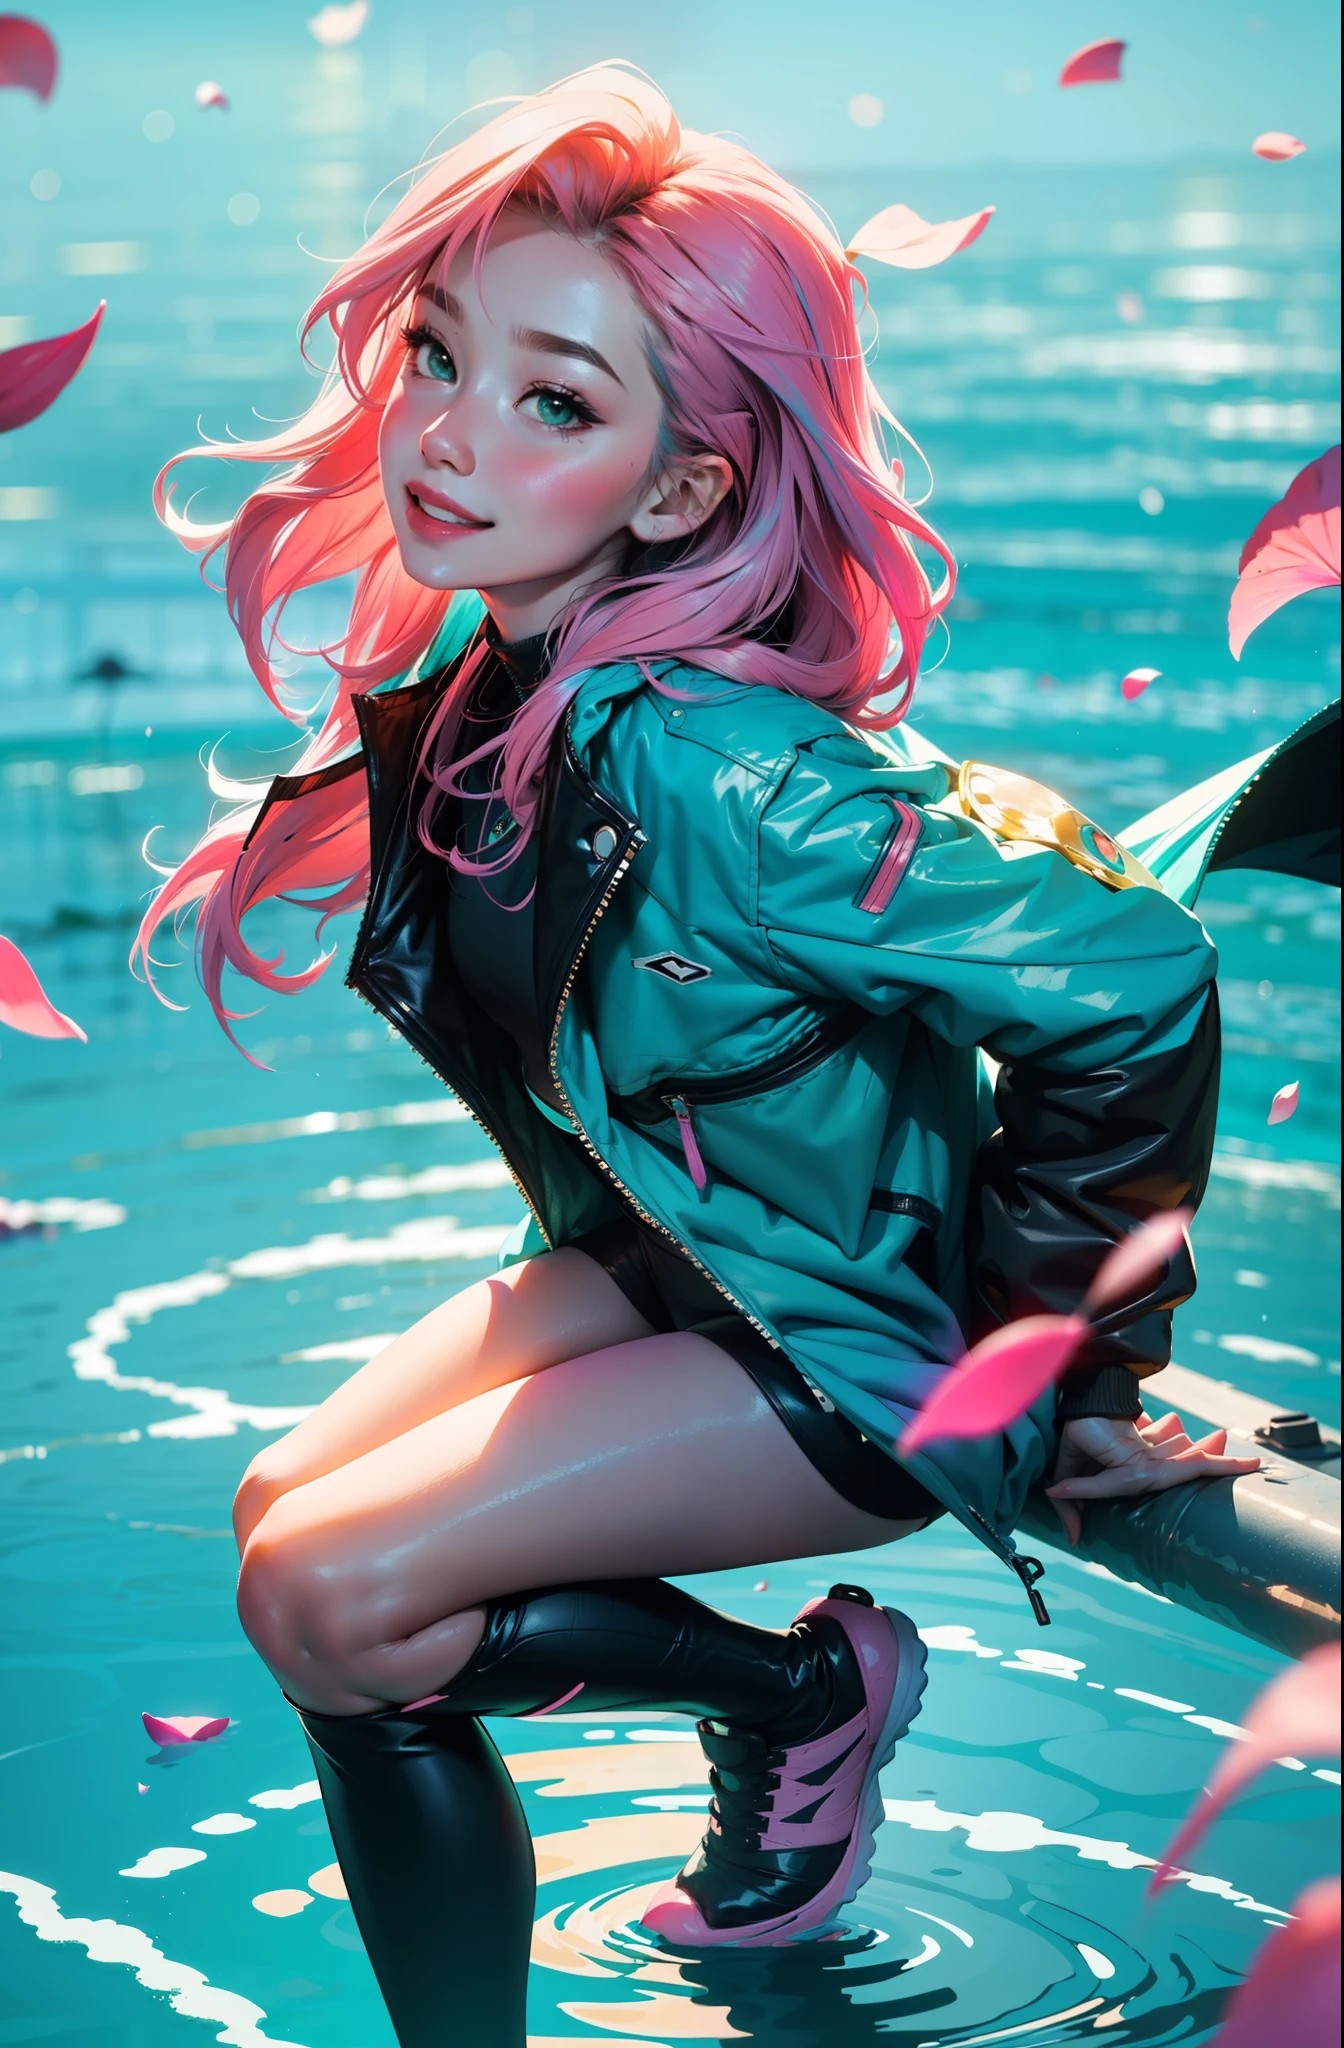 cyberpunk female woman wearing (turquoise Jacket with chromatic accents:1.1), sleek pink and White full bodysuit, side view turning to face camera, (Petal Blush, Lagoon Blue color background:1.3), amazing smile, looking at camera, golden hour
